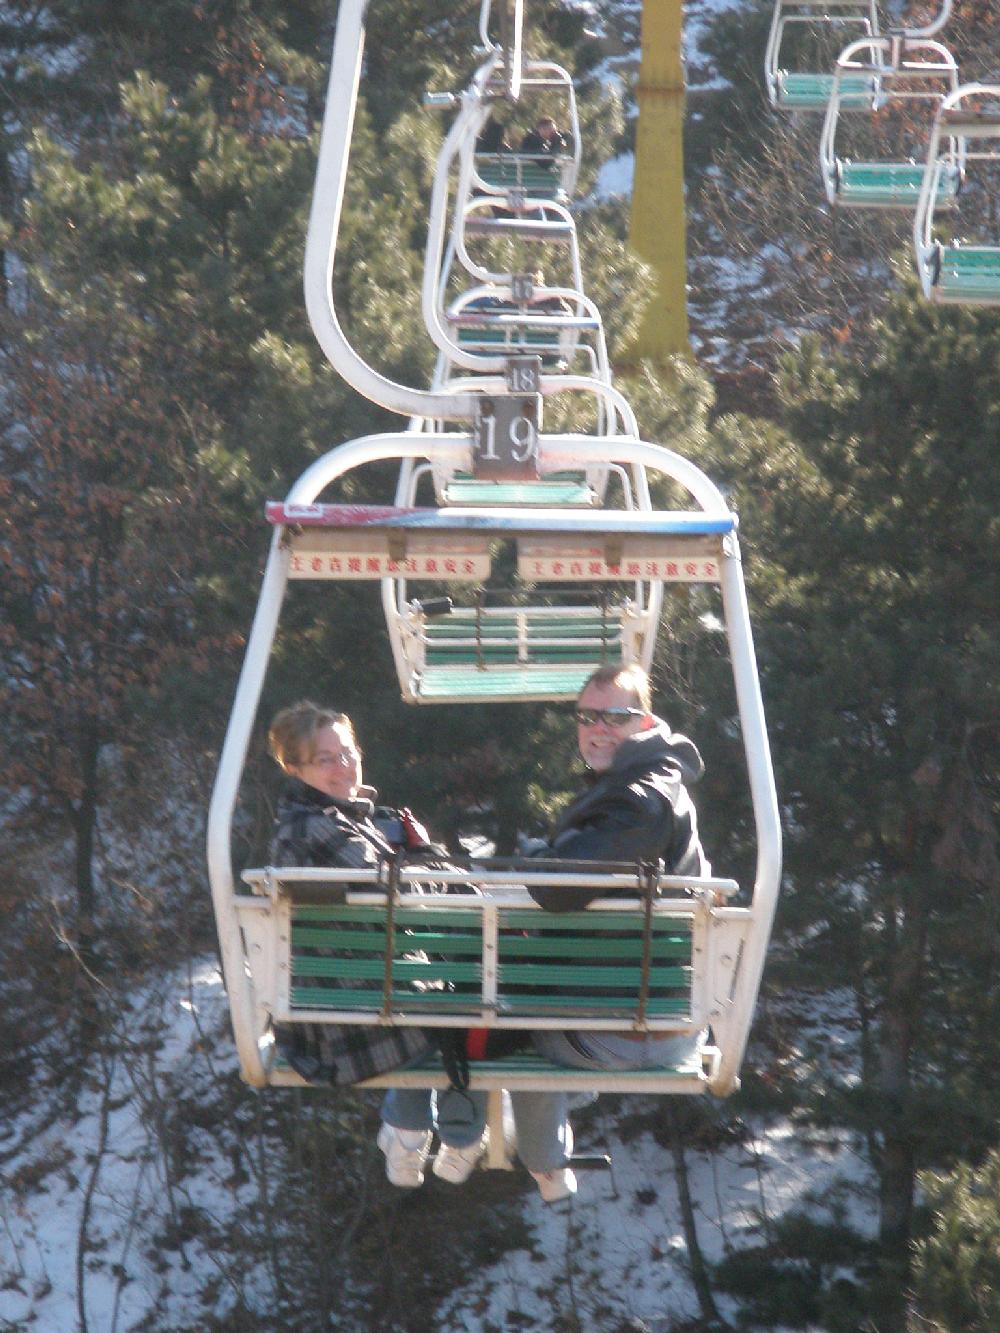 The Great Wall Chair Lift